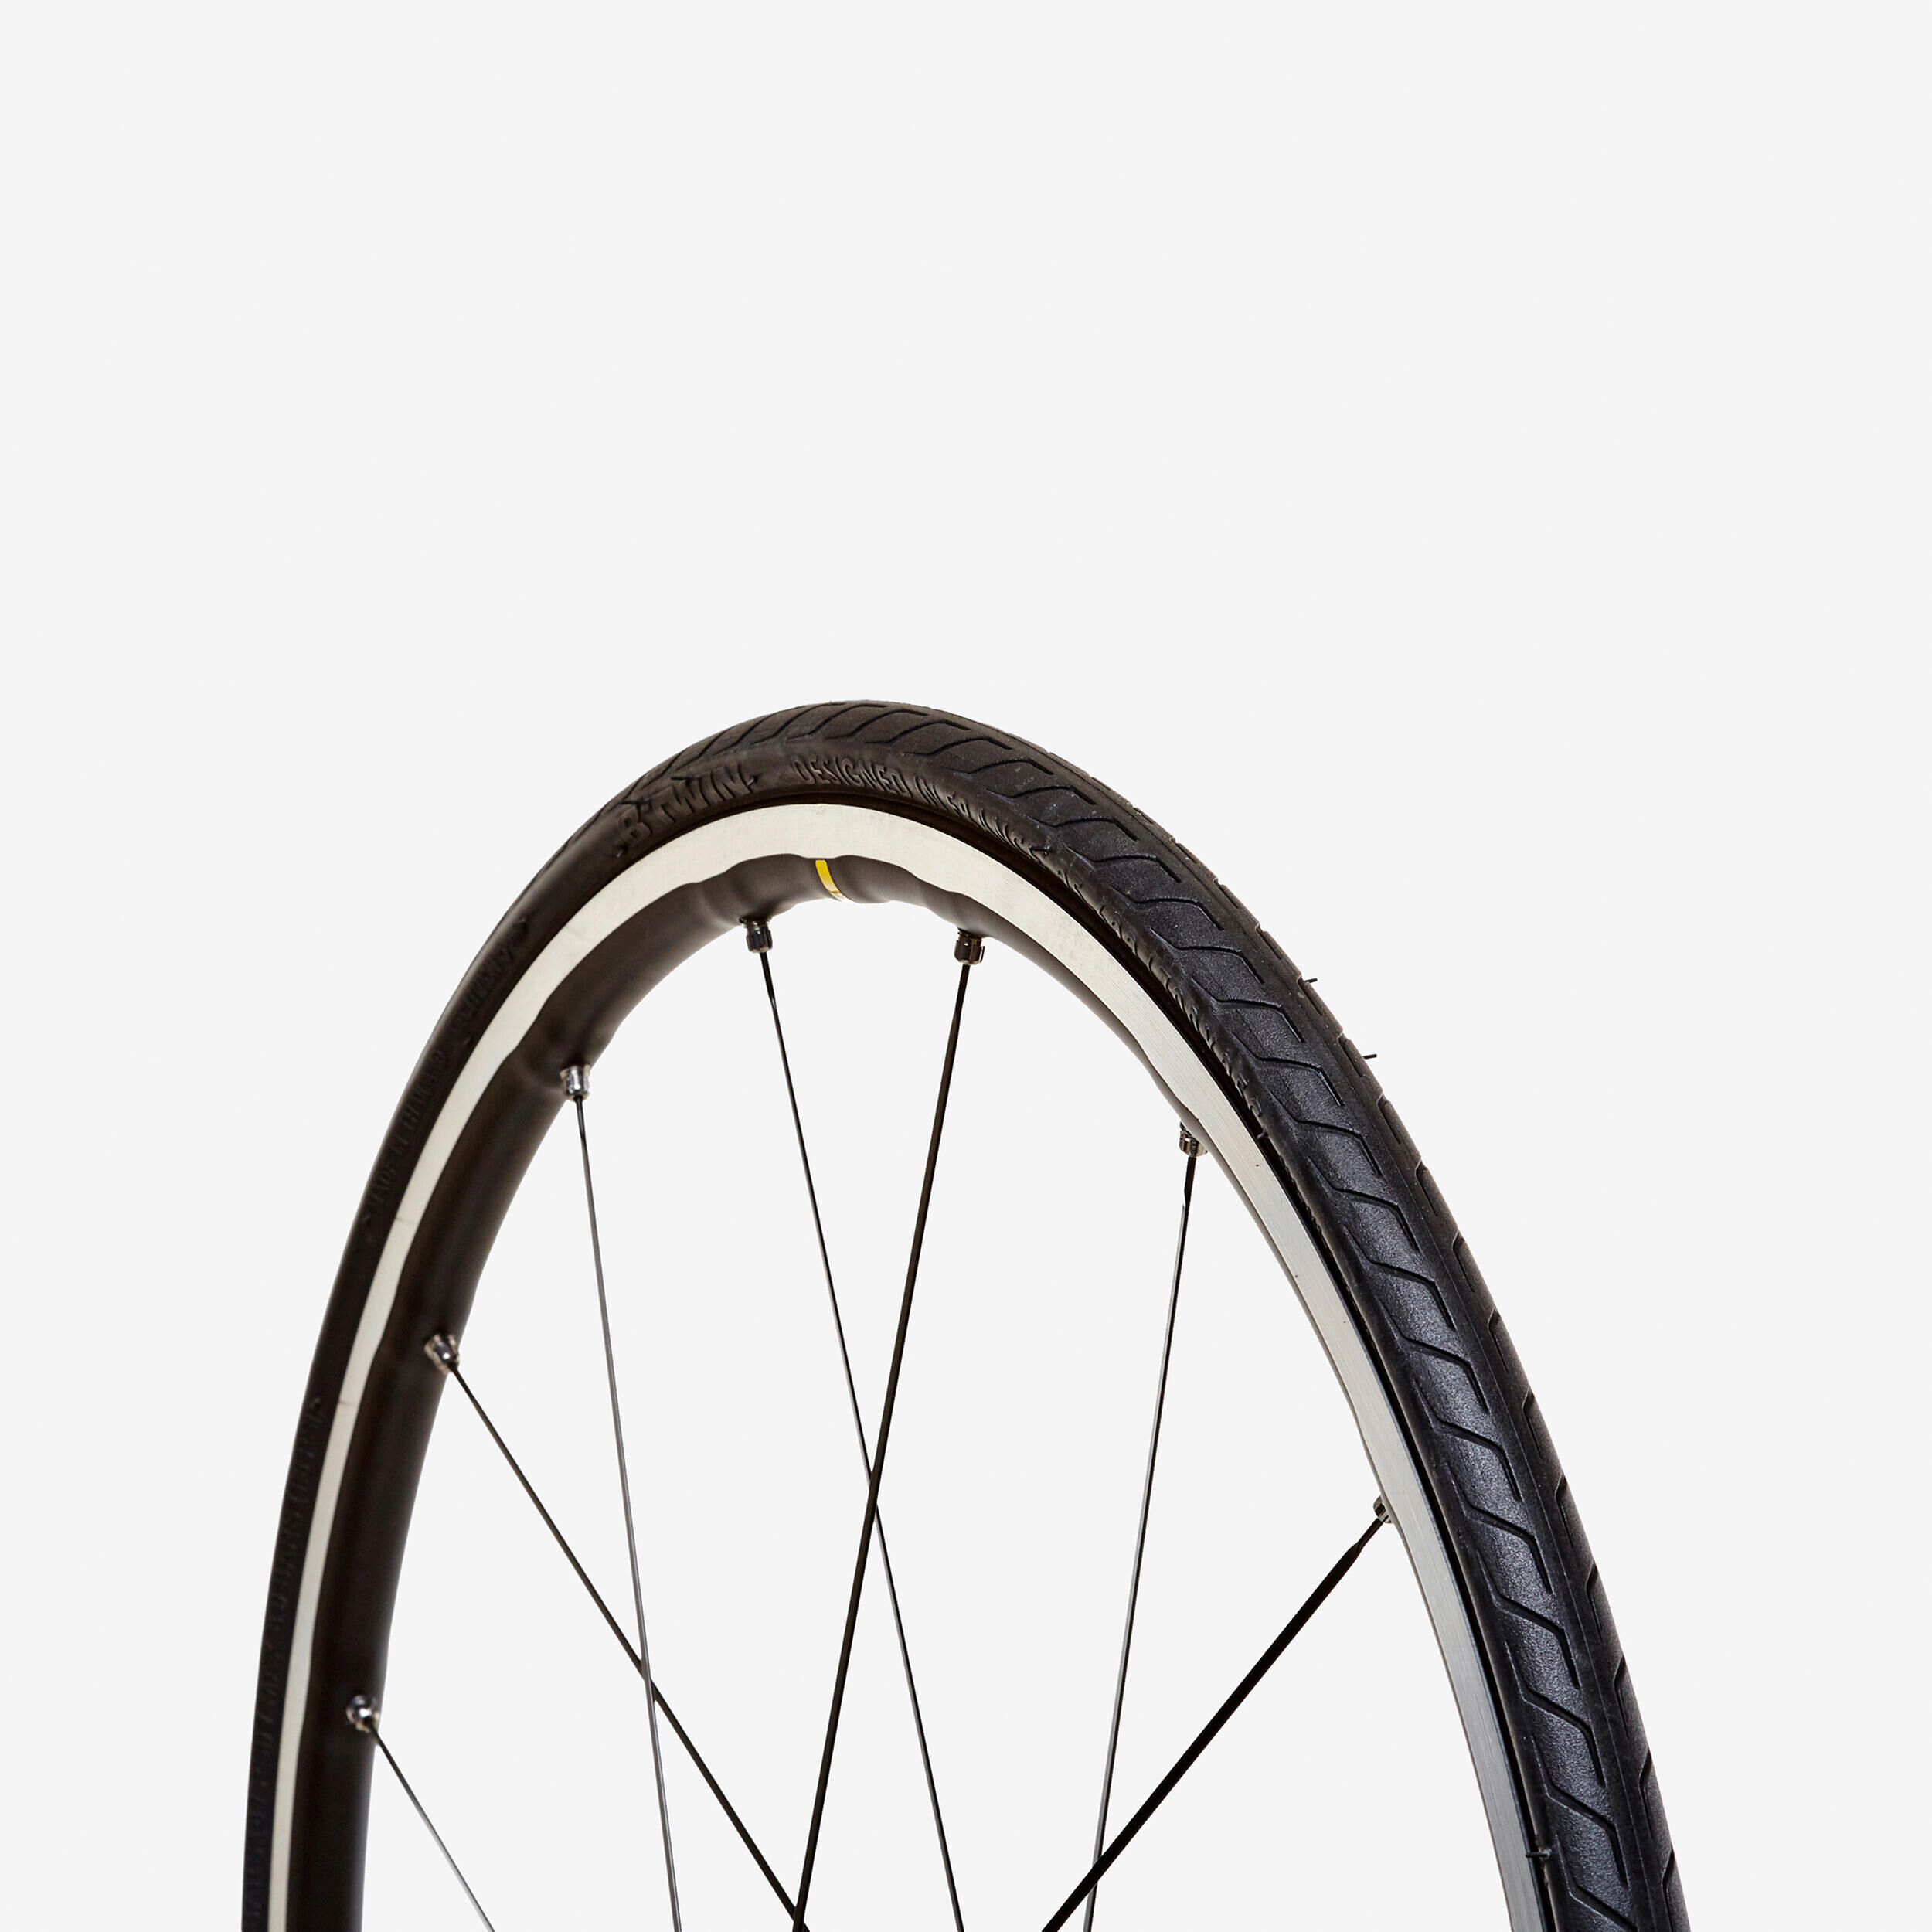 BTWIN Triban Protect Road Bike Tyre 700x28